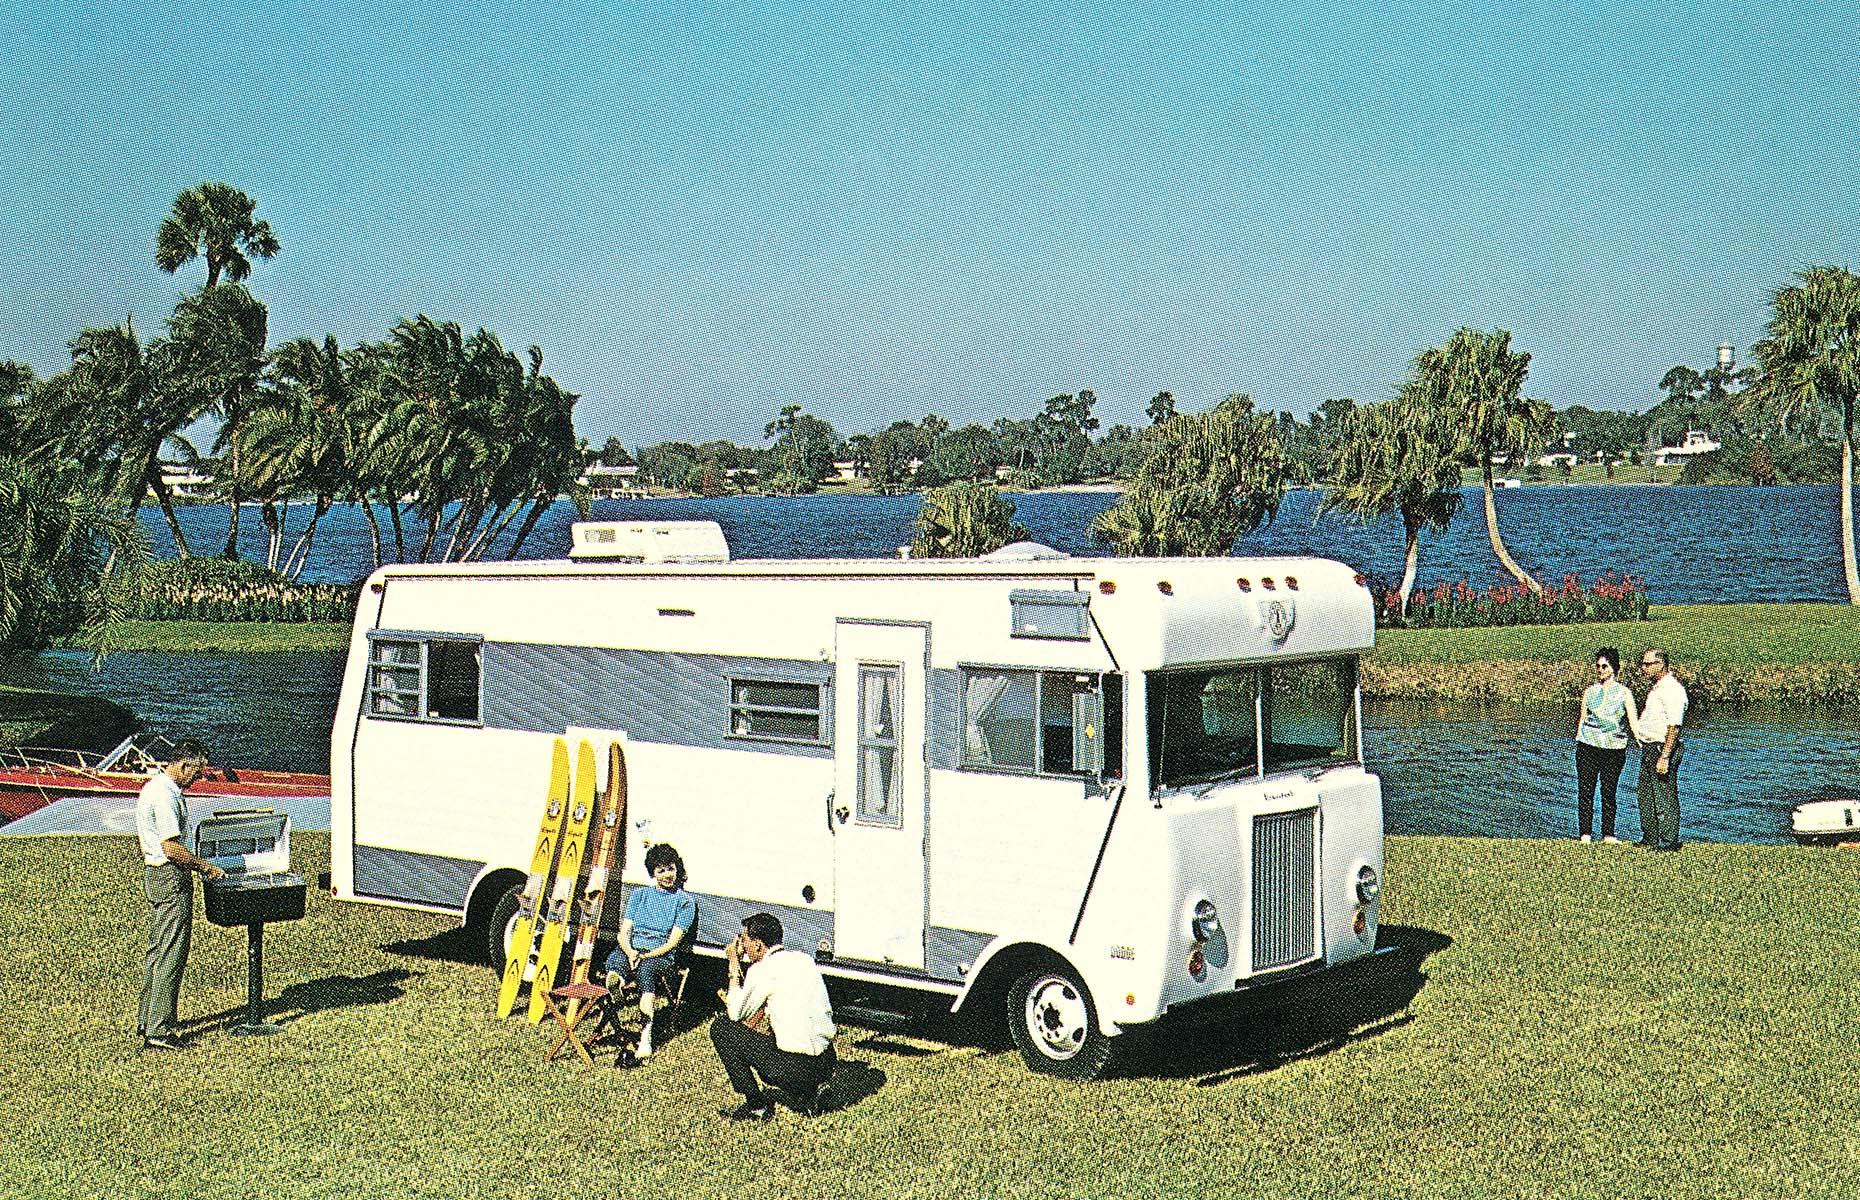 RVs came on leaps and bounds in the 1960s: the vehicles were getting larger and larger, and mod cons such as insulation (pioneered by Winnebago and its Thermo-Panel) were becoming increasingly popular. The continued mass production of the vehicles carried on driving down prices too.